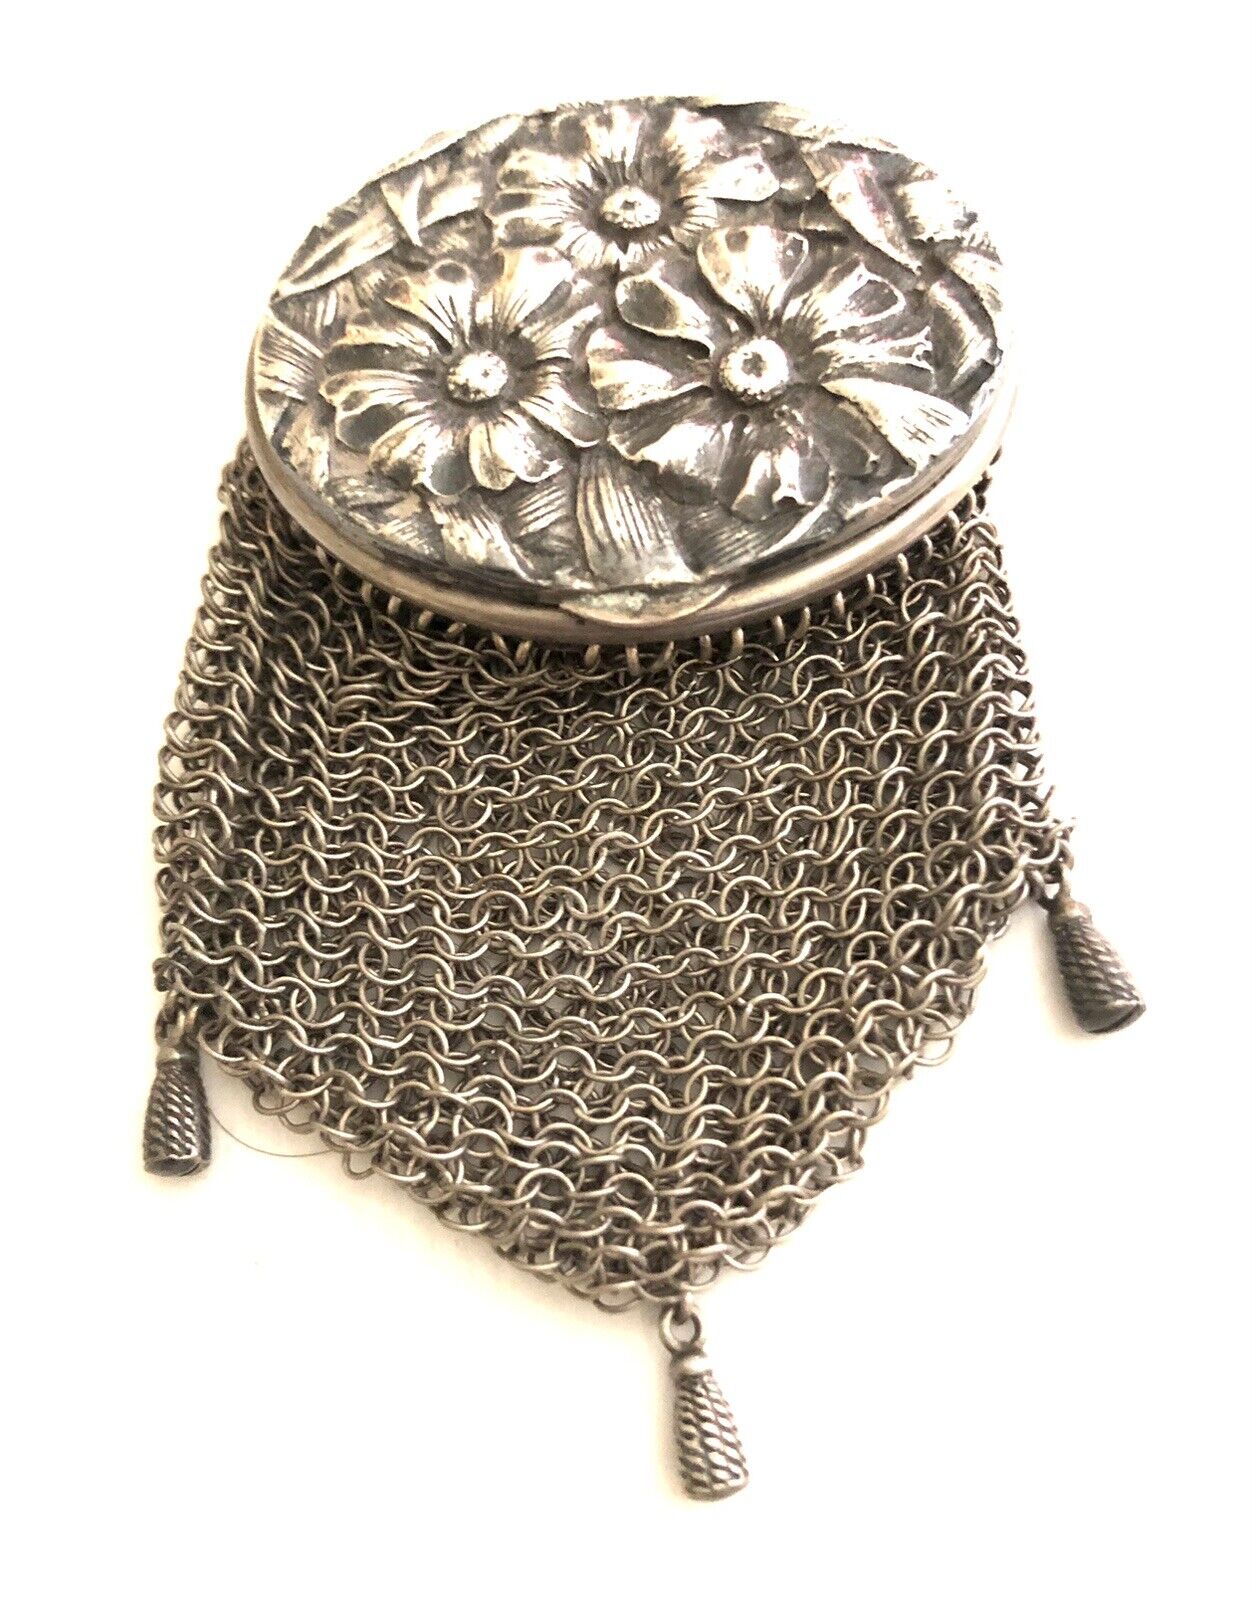 Antique Art Deco Sterling Silver Mini Mesh Purse - Flowers Marked Sterling 3.50”